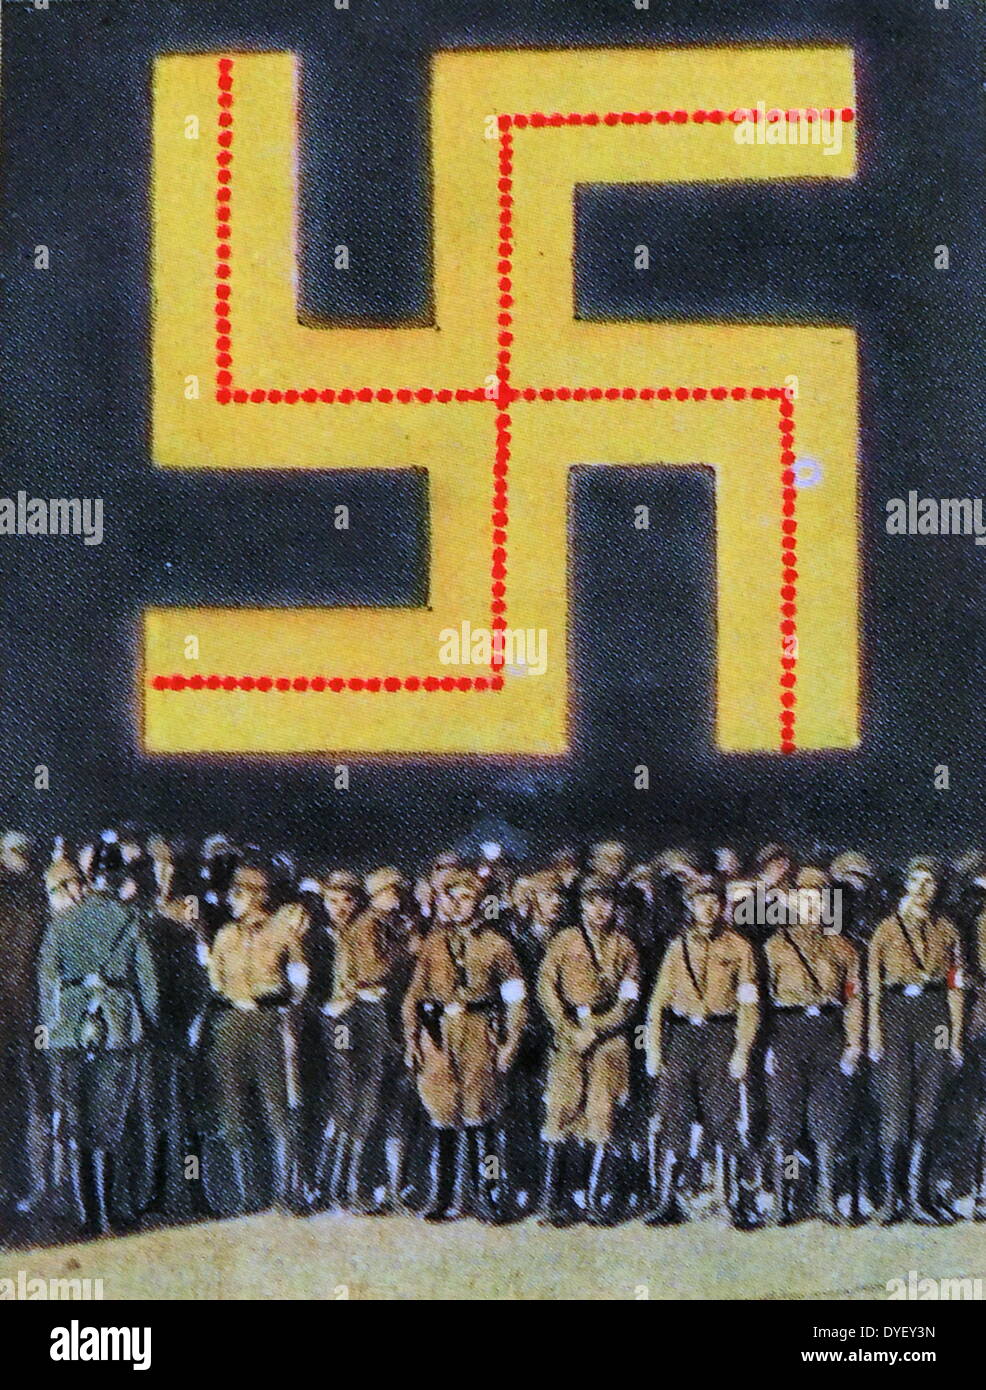 Germany, a rally to clebrate the comming to power of the Nazi party in January 1933, Germany Stock Photo